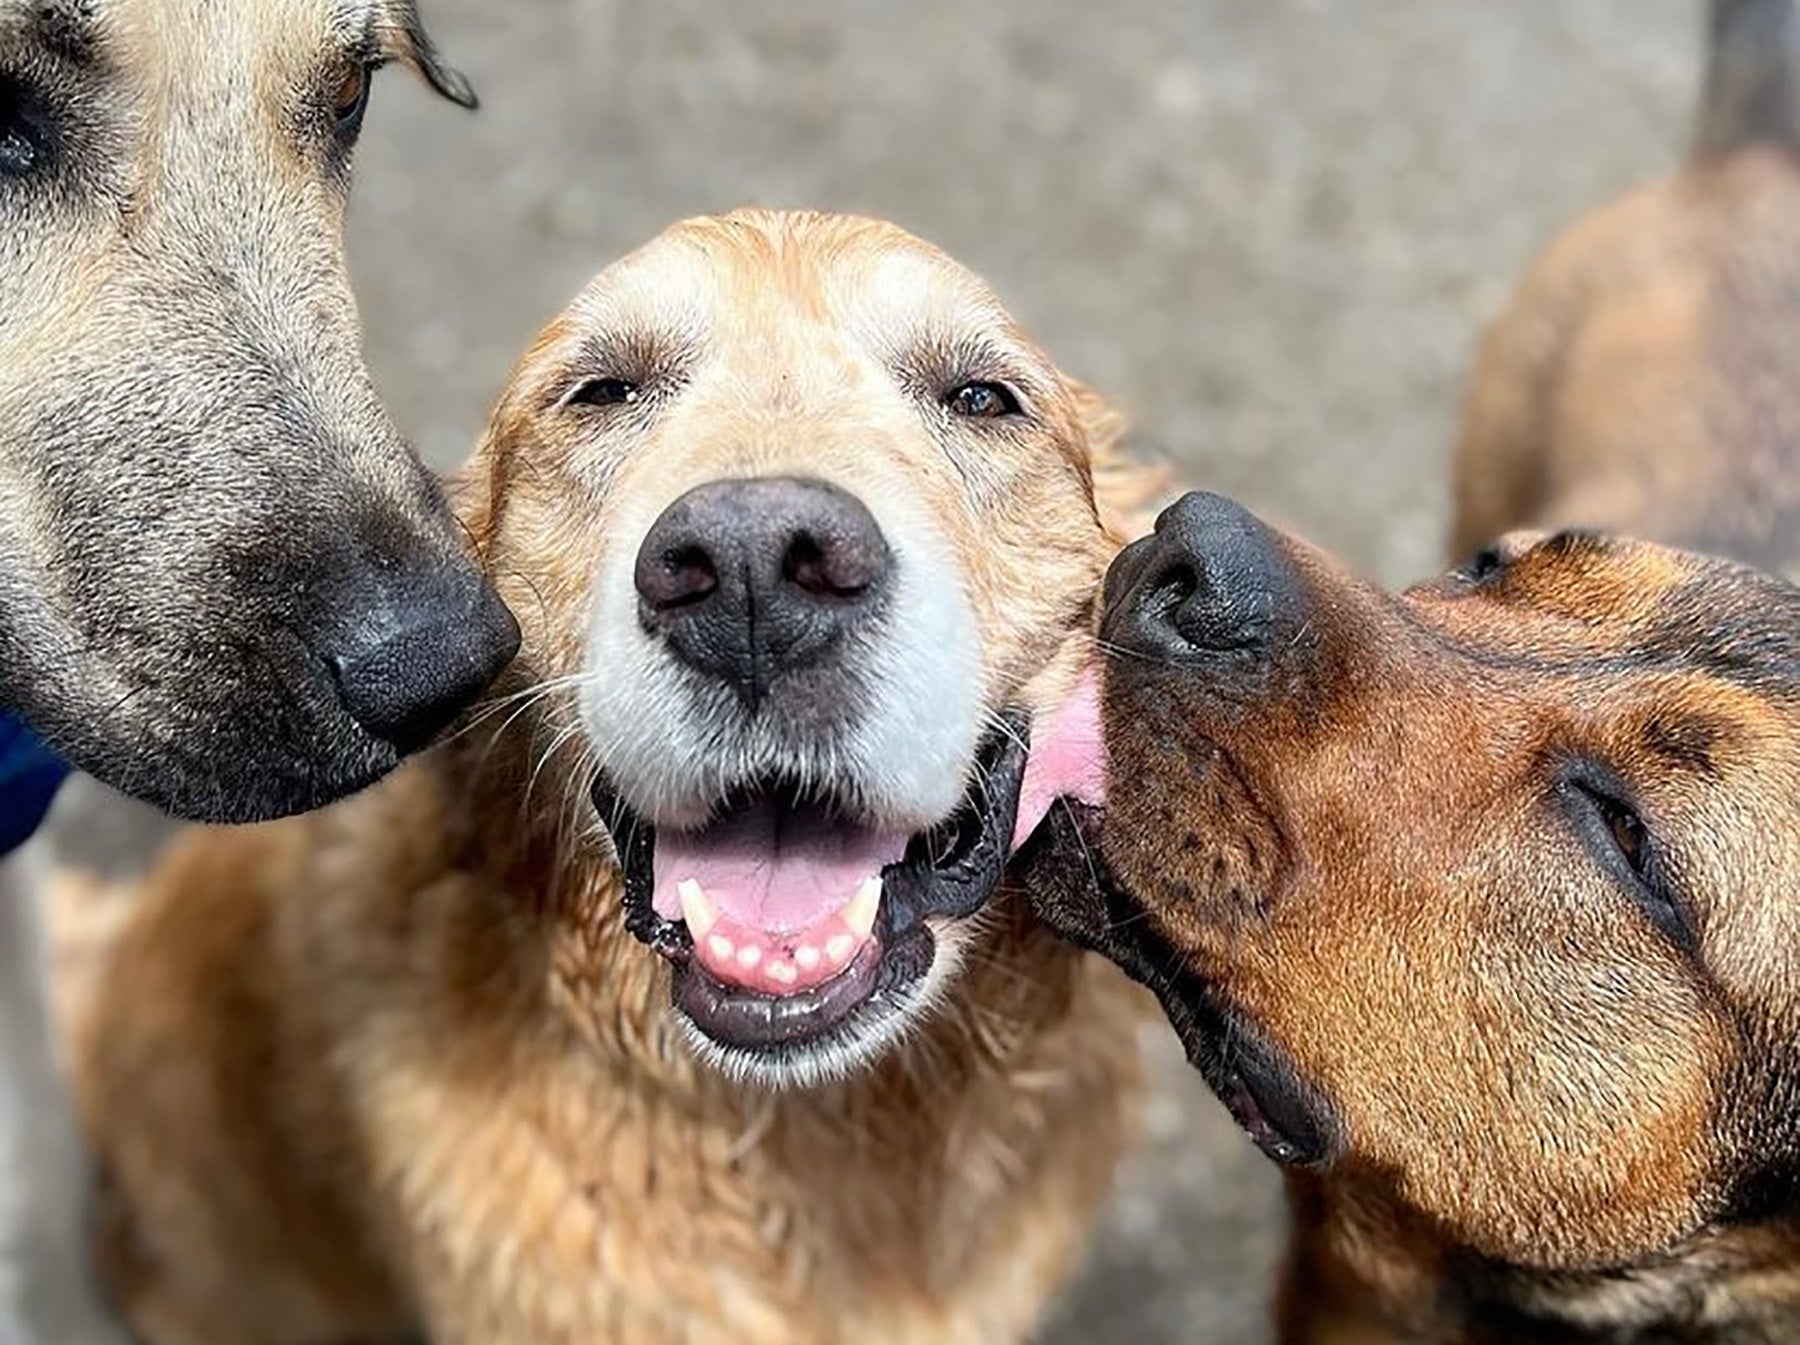 Three dogs at the Asher Hourse. The middle dog is looking directly into the camera, the right dog is licking the center dog in the face, and the left dog is sniffiing the muzzle of the middle dog. 